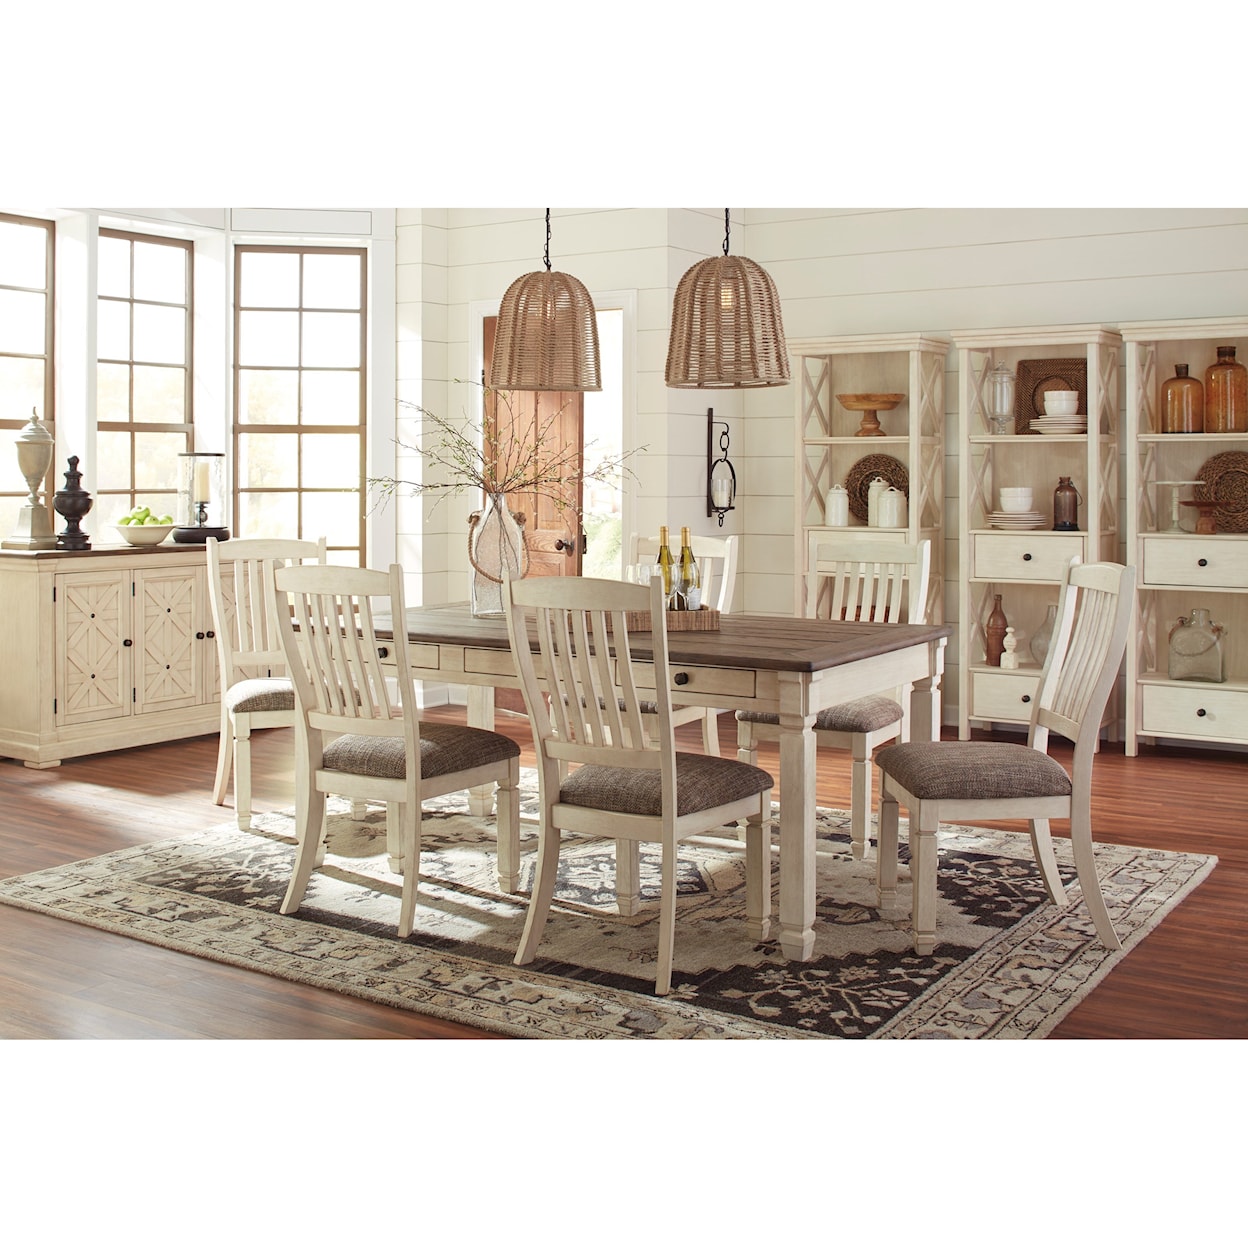 Benchcraft Bolanburg 7-Piece Table and Chair Set